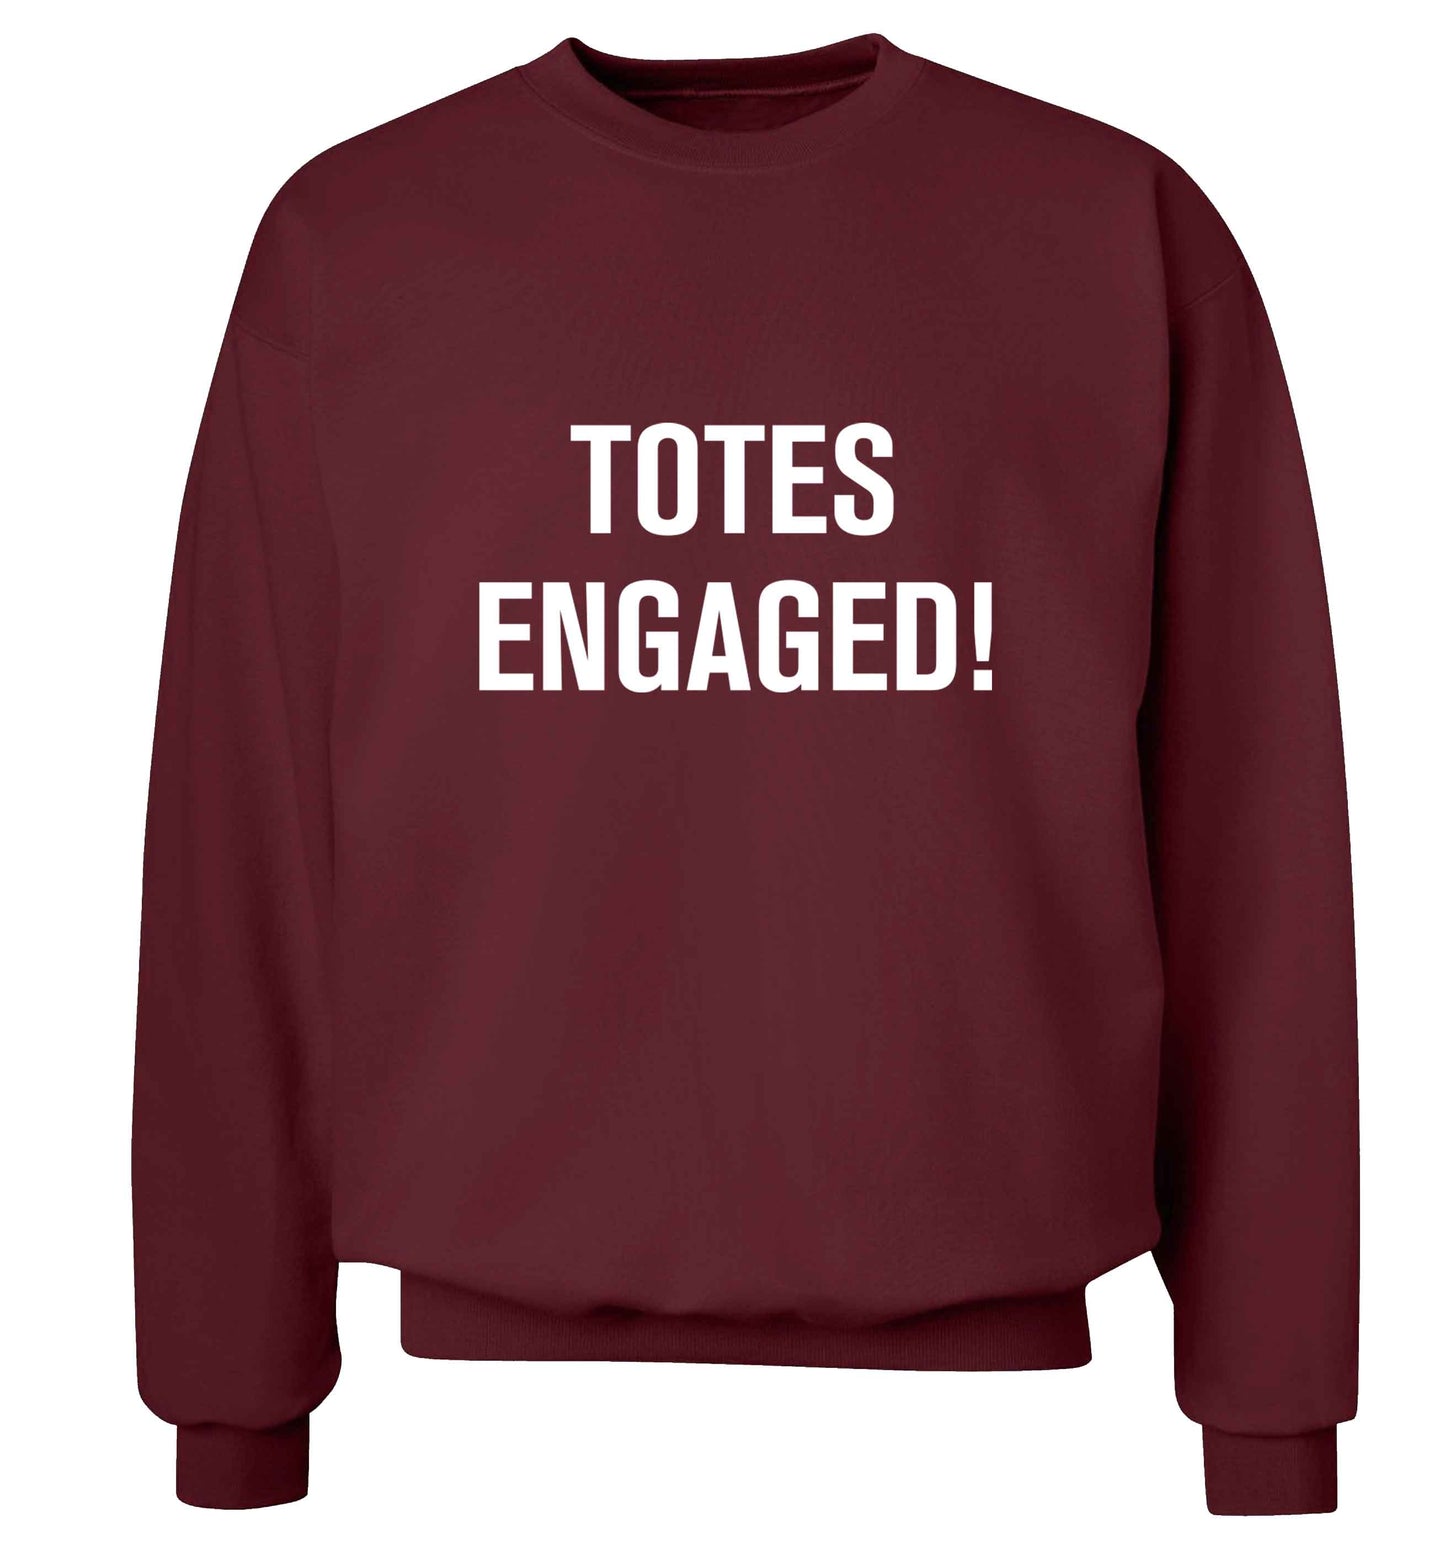 Totes engaged adult's unisex maroon sweater 2XL